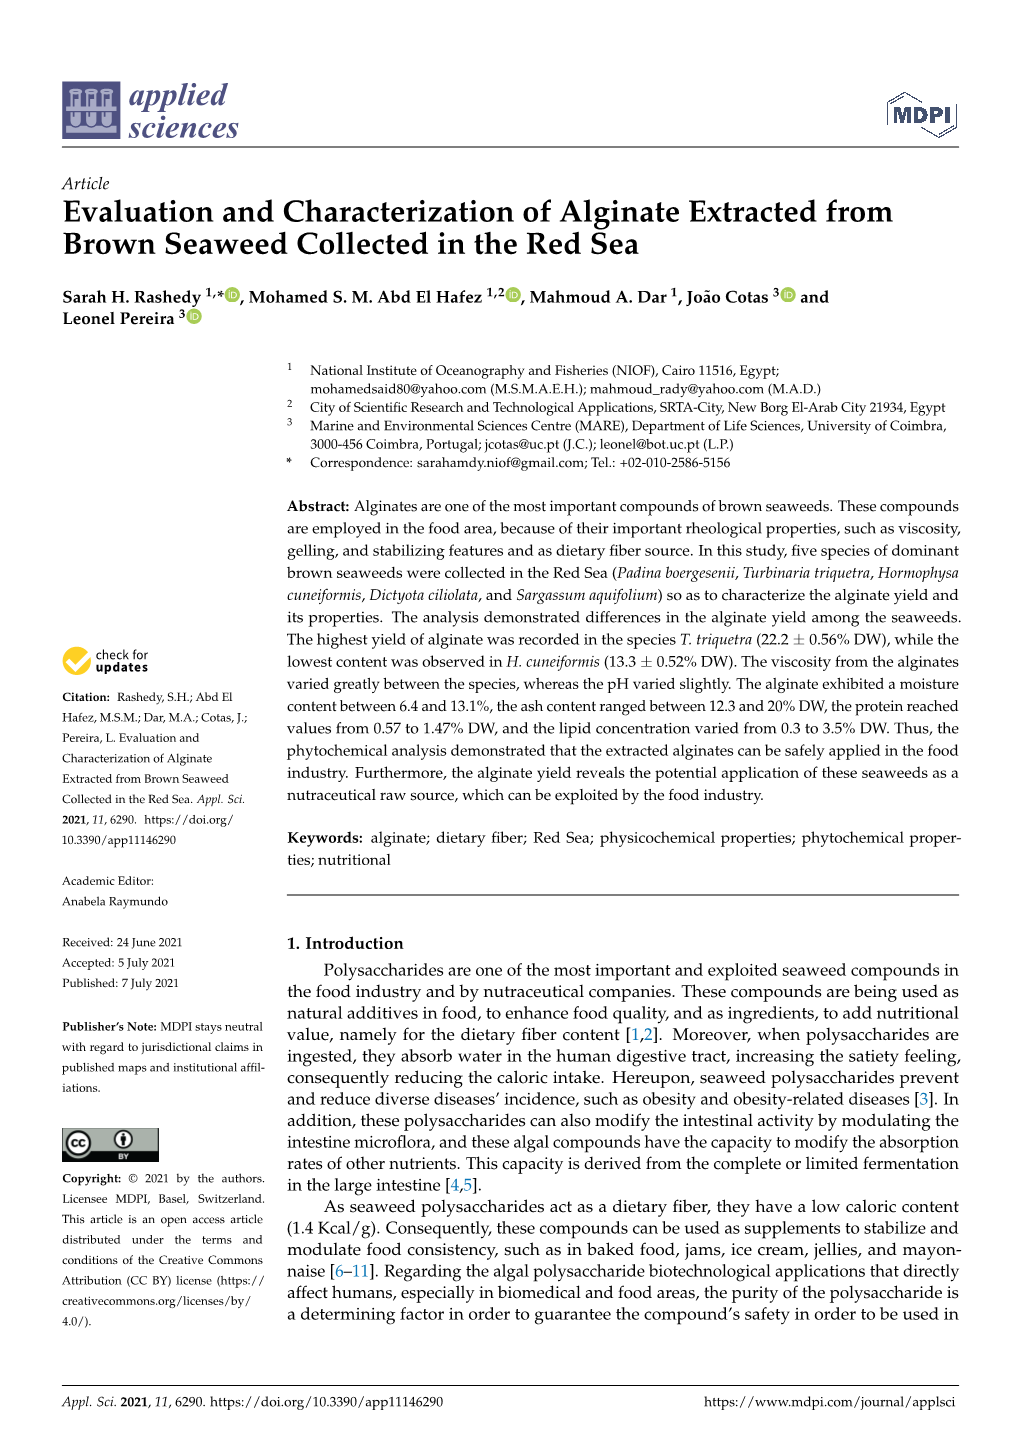 Evaluation and Characterization of Alginate Extracted from Brown Seaweed Collected in the Red Sea